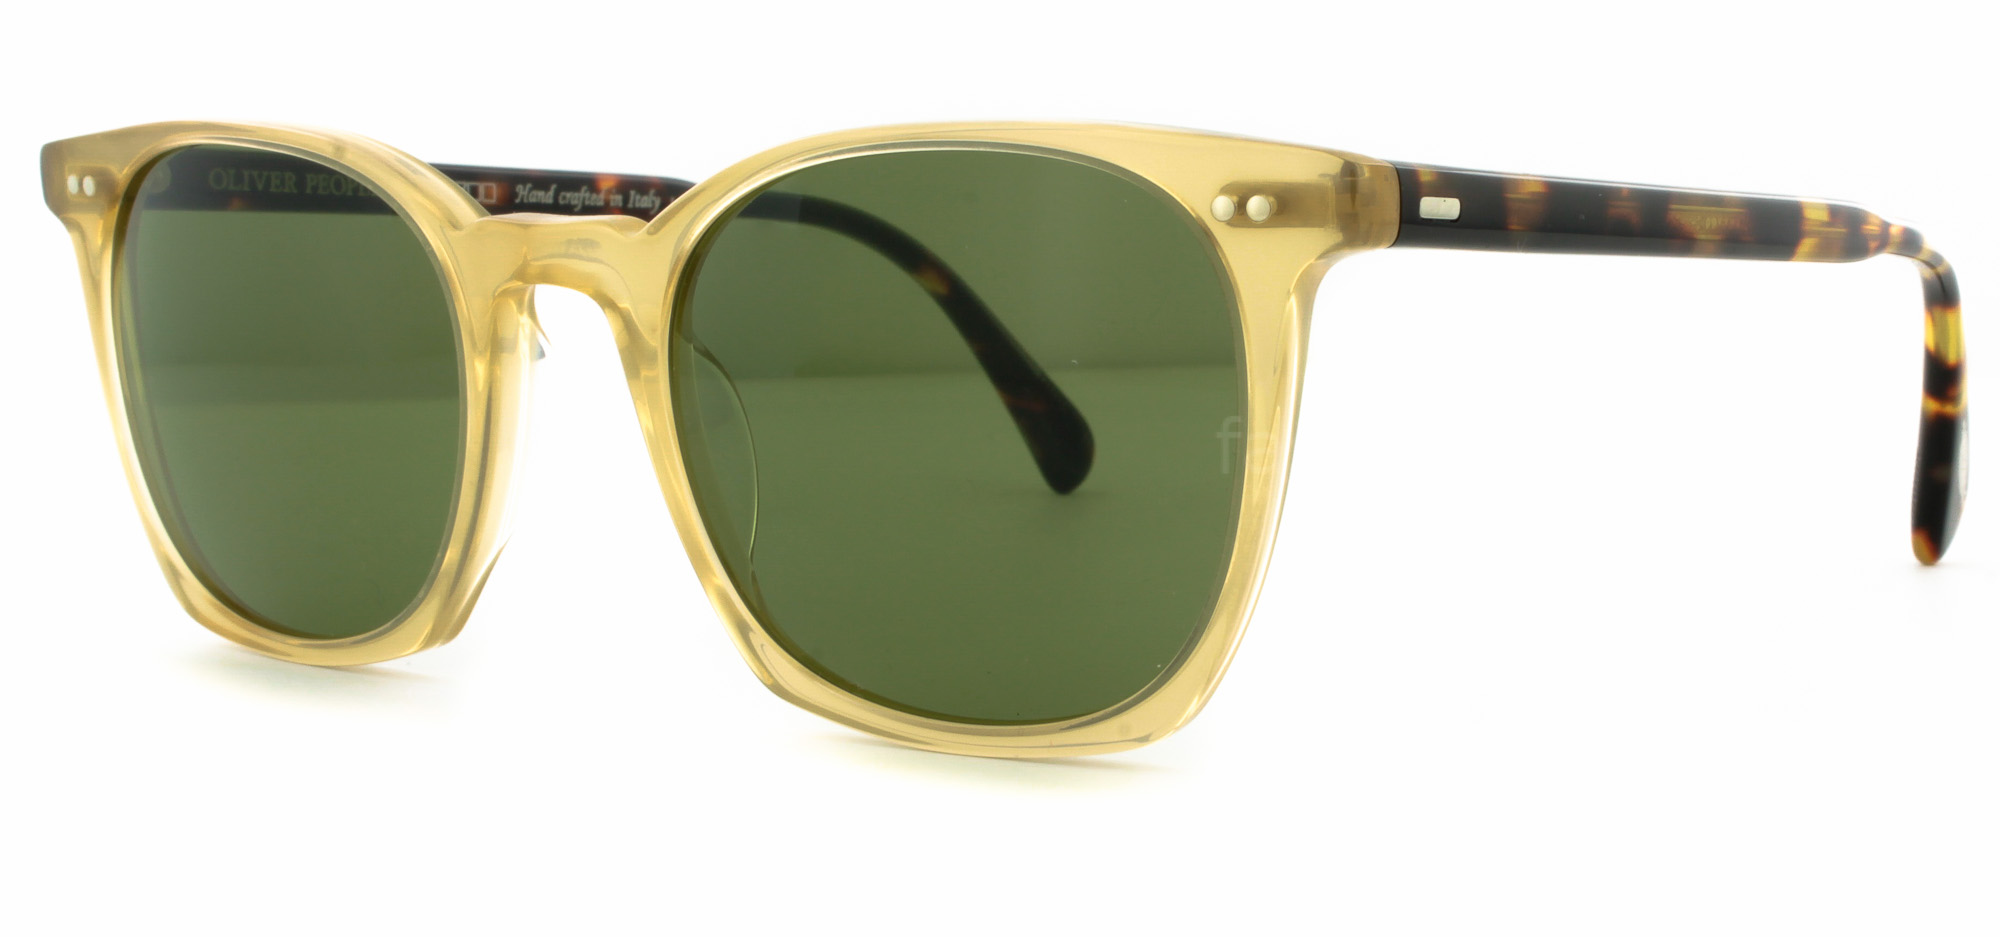 OLIVER PEOPLES L.A COEN SUN 149352